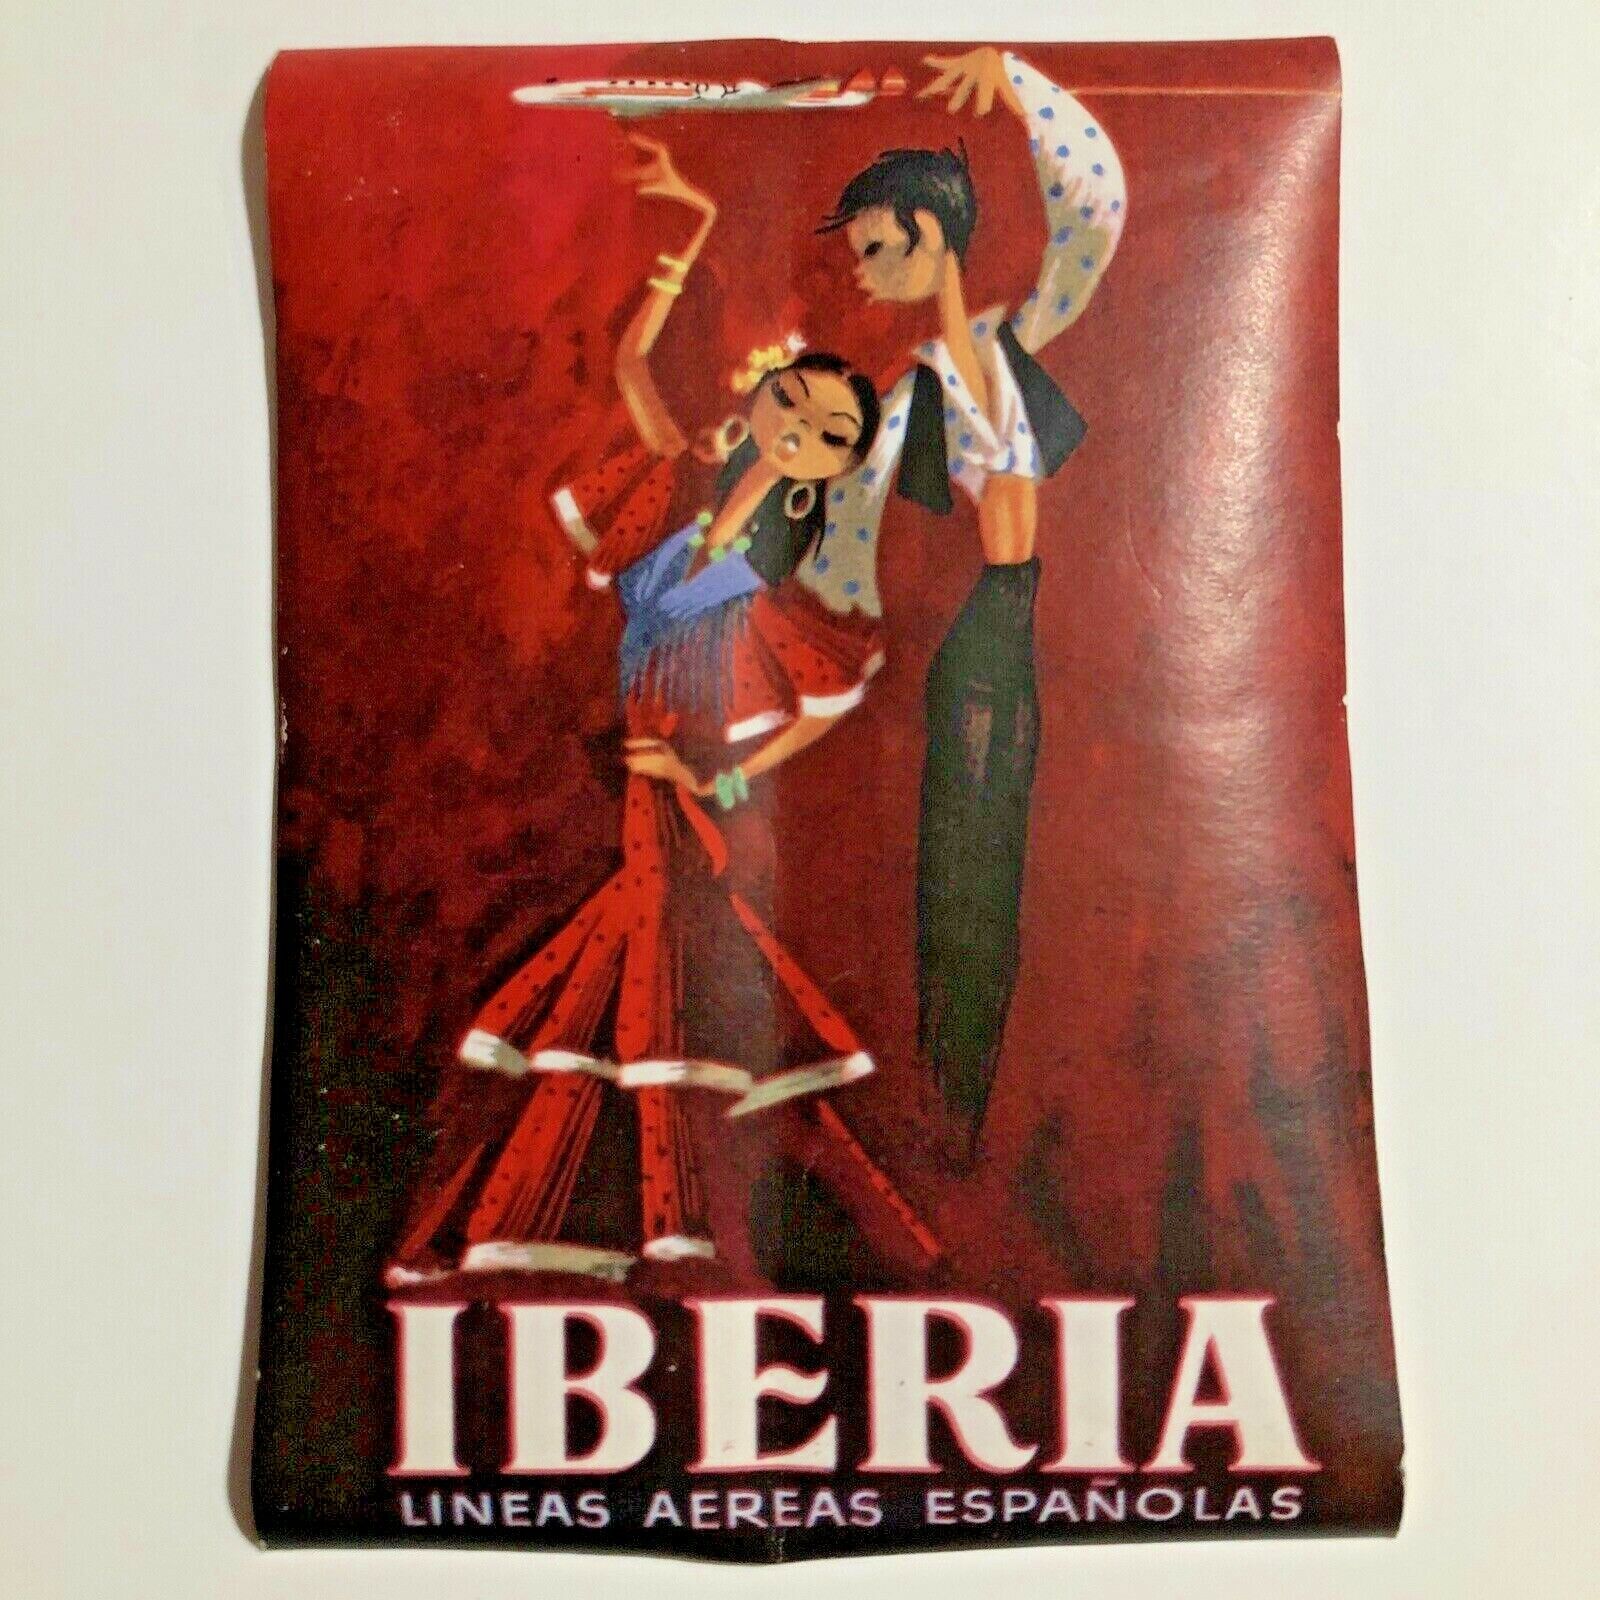 IBERIA AIRLINES NOS Vintage Airline Luggage Label Decal Tag 